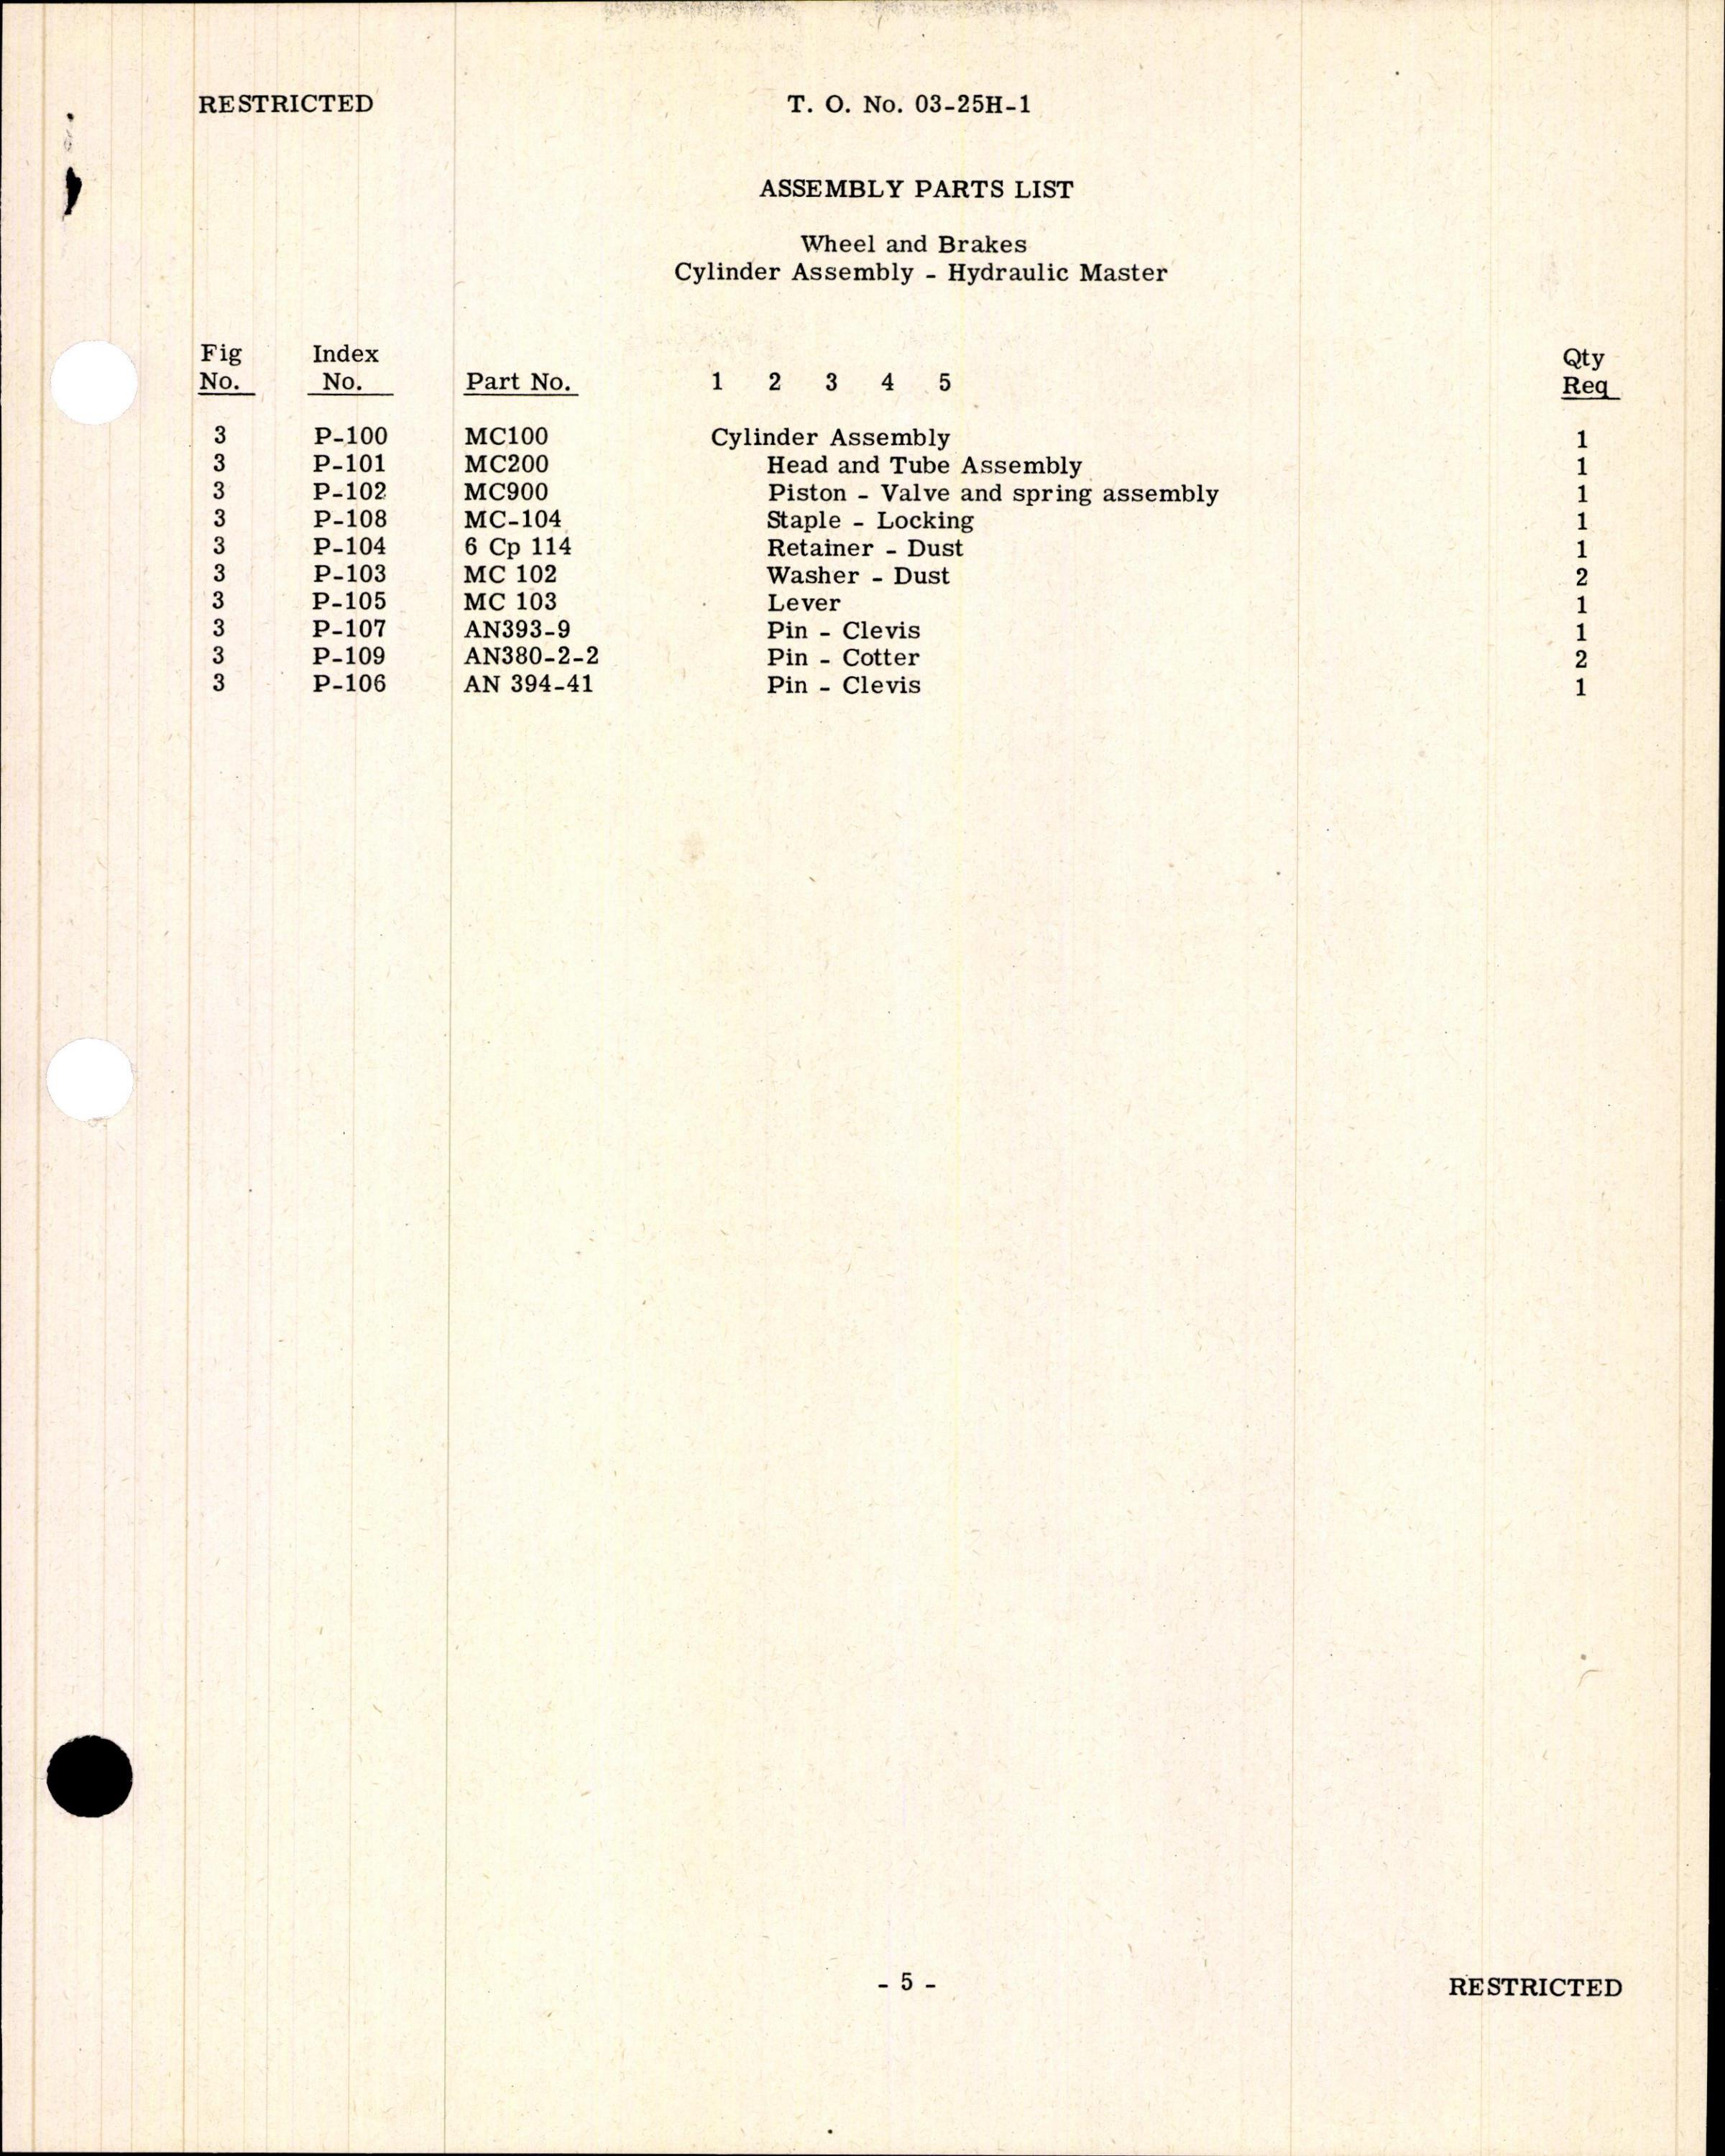 Sample page 9 from AirCorps Library document: Handbook of Instructions with Parts Catalog for Model MC100 Hydraulic Master Cylinder